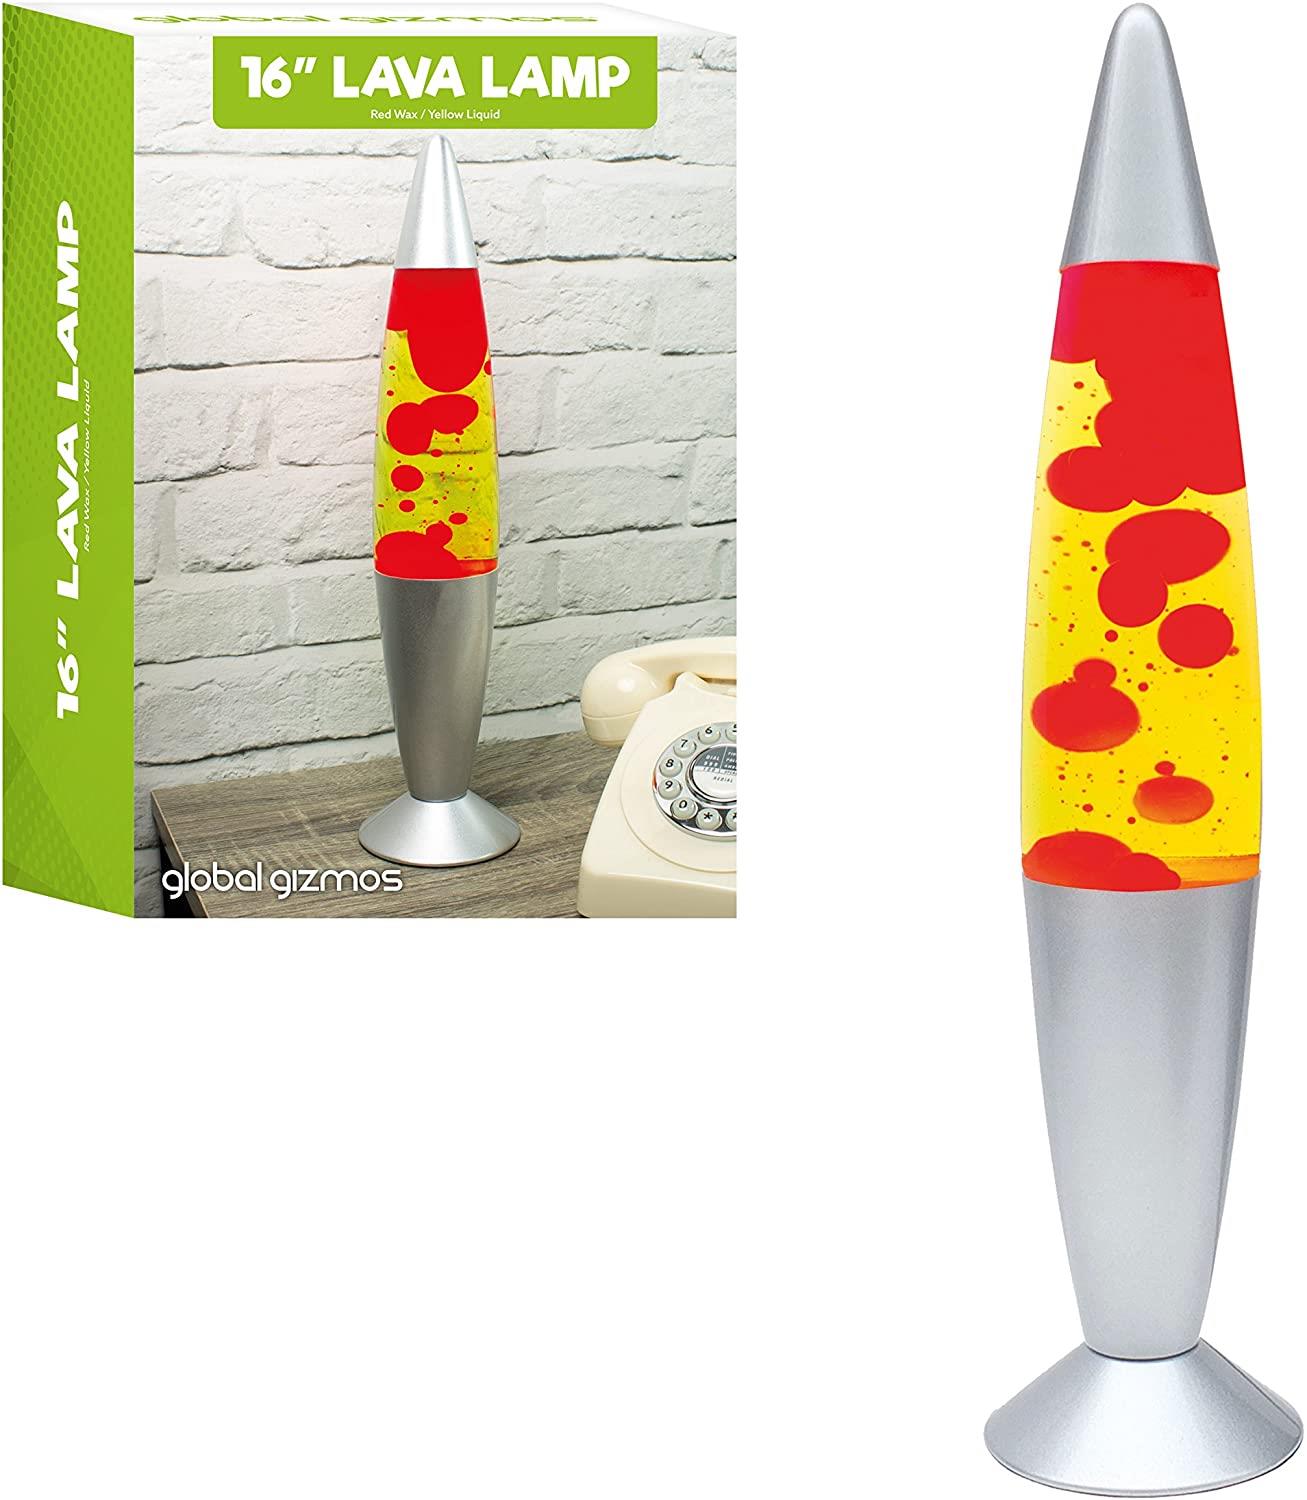 Global Gizmos 16 Inches Tall Red Wax/ Yellow Liquid Lava Lamp- 48850